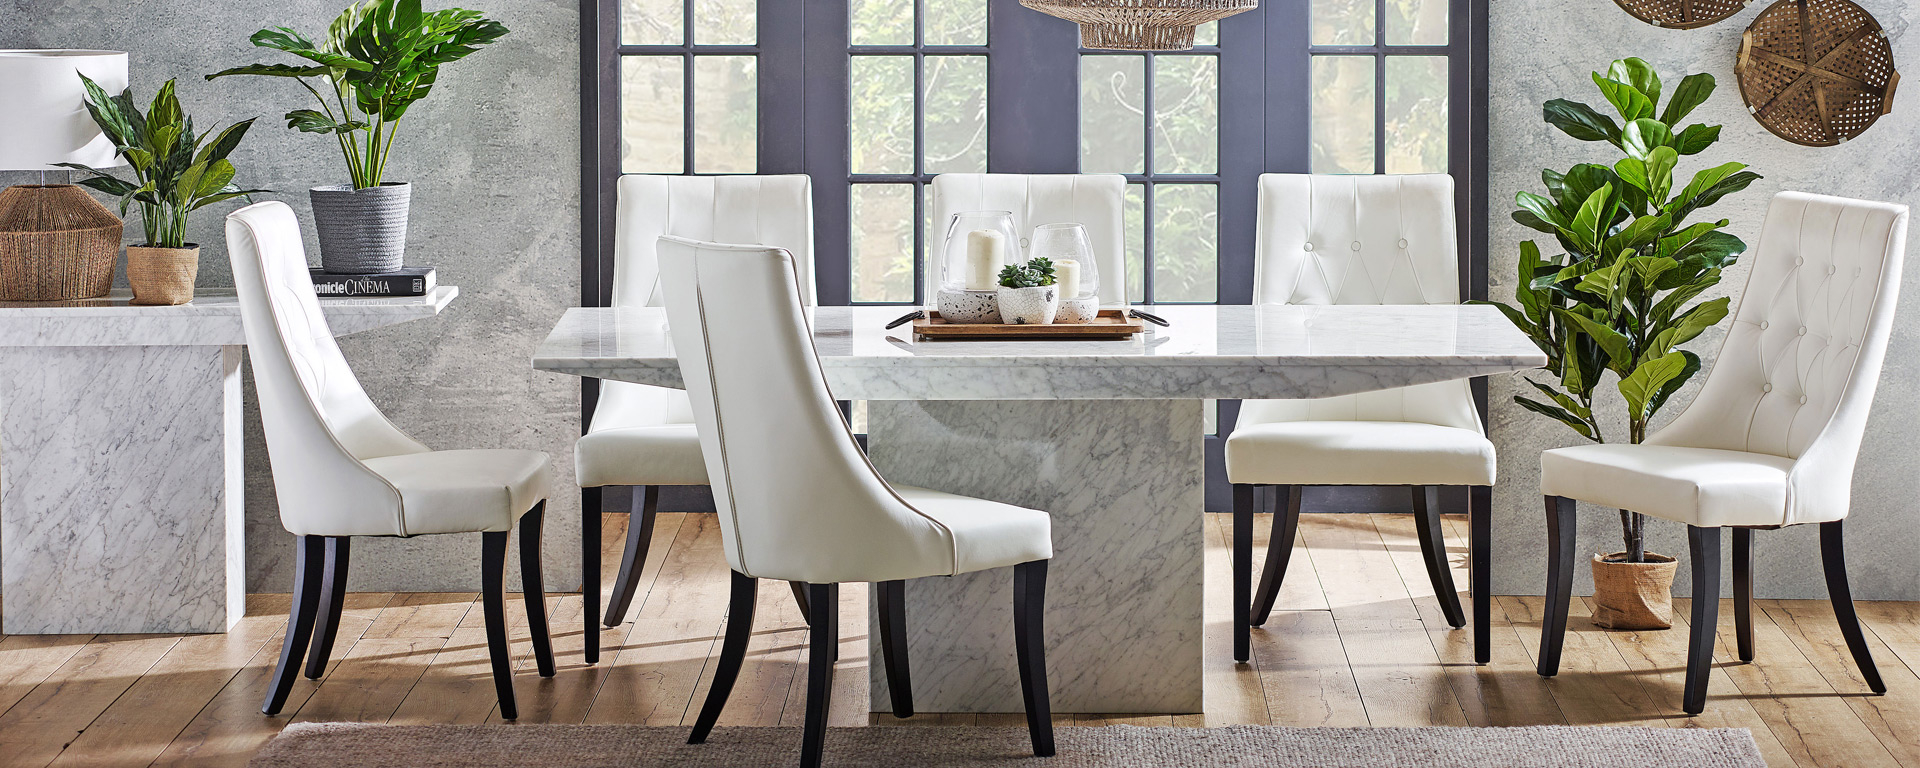 Dining Room Goals 5 Trending Concrete And Stone Dining with size 1920 X 768